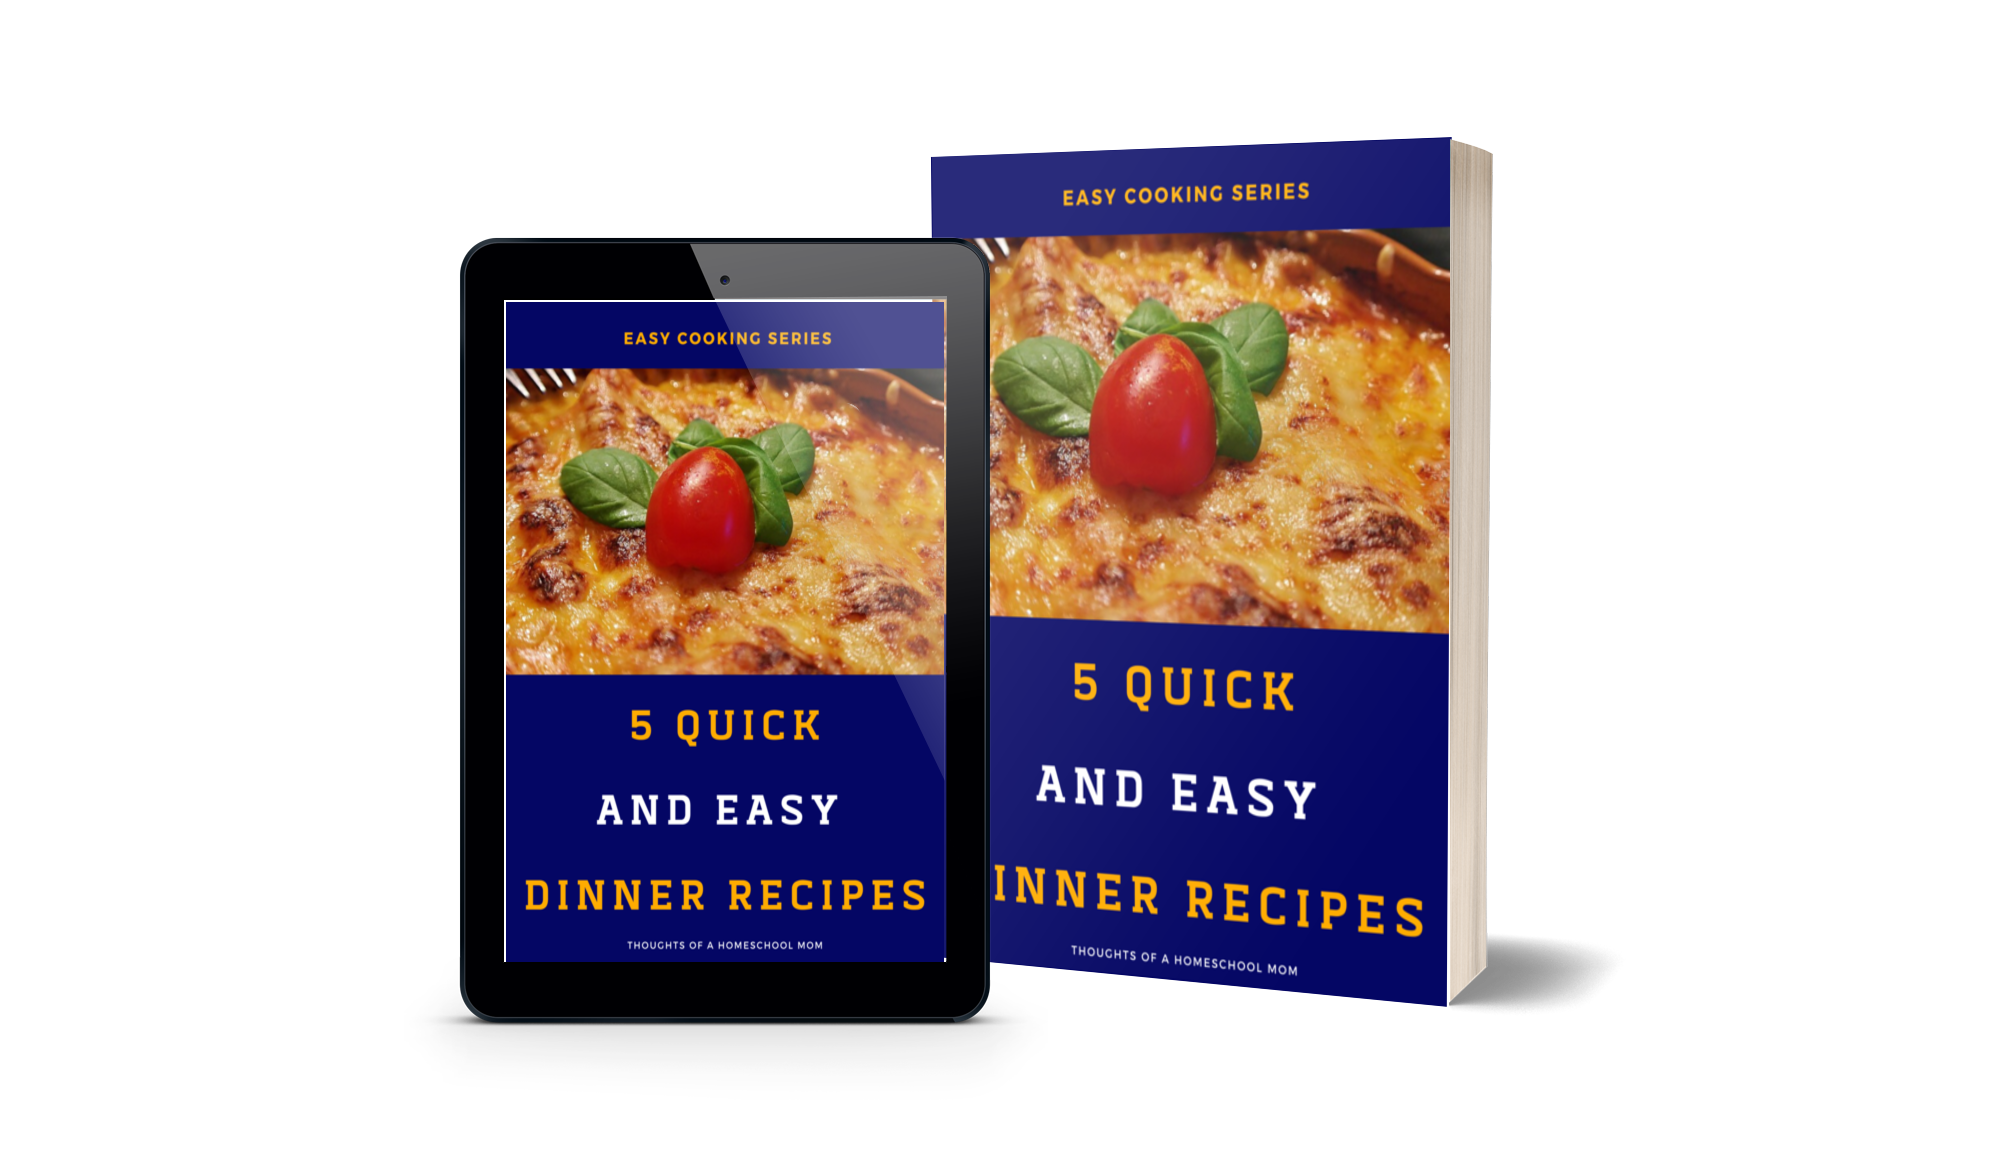 Easy Cooking Series - book and tablet